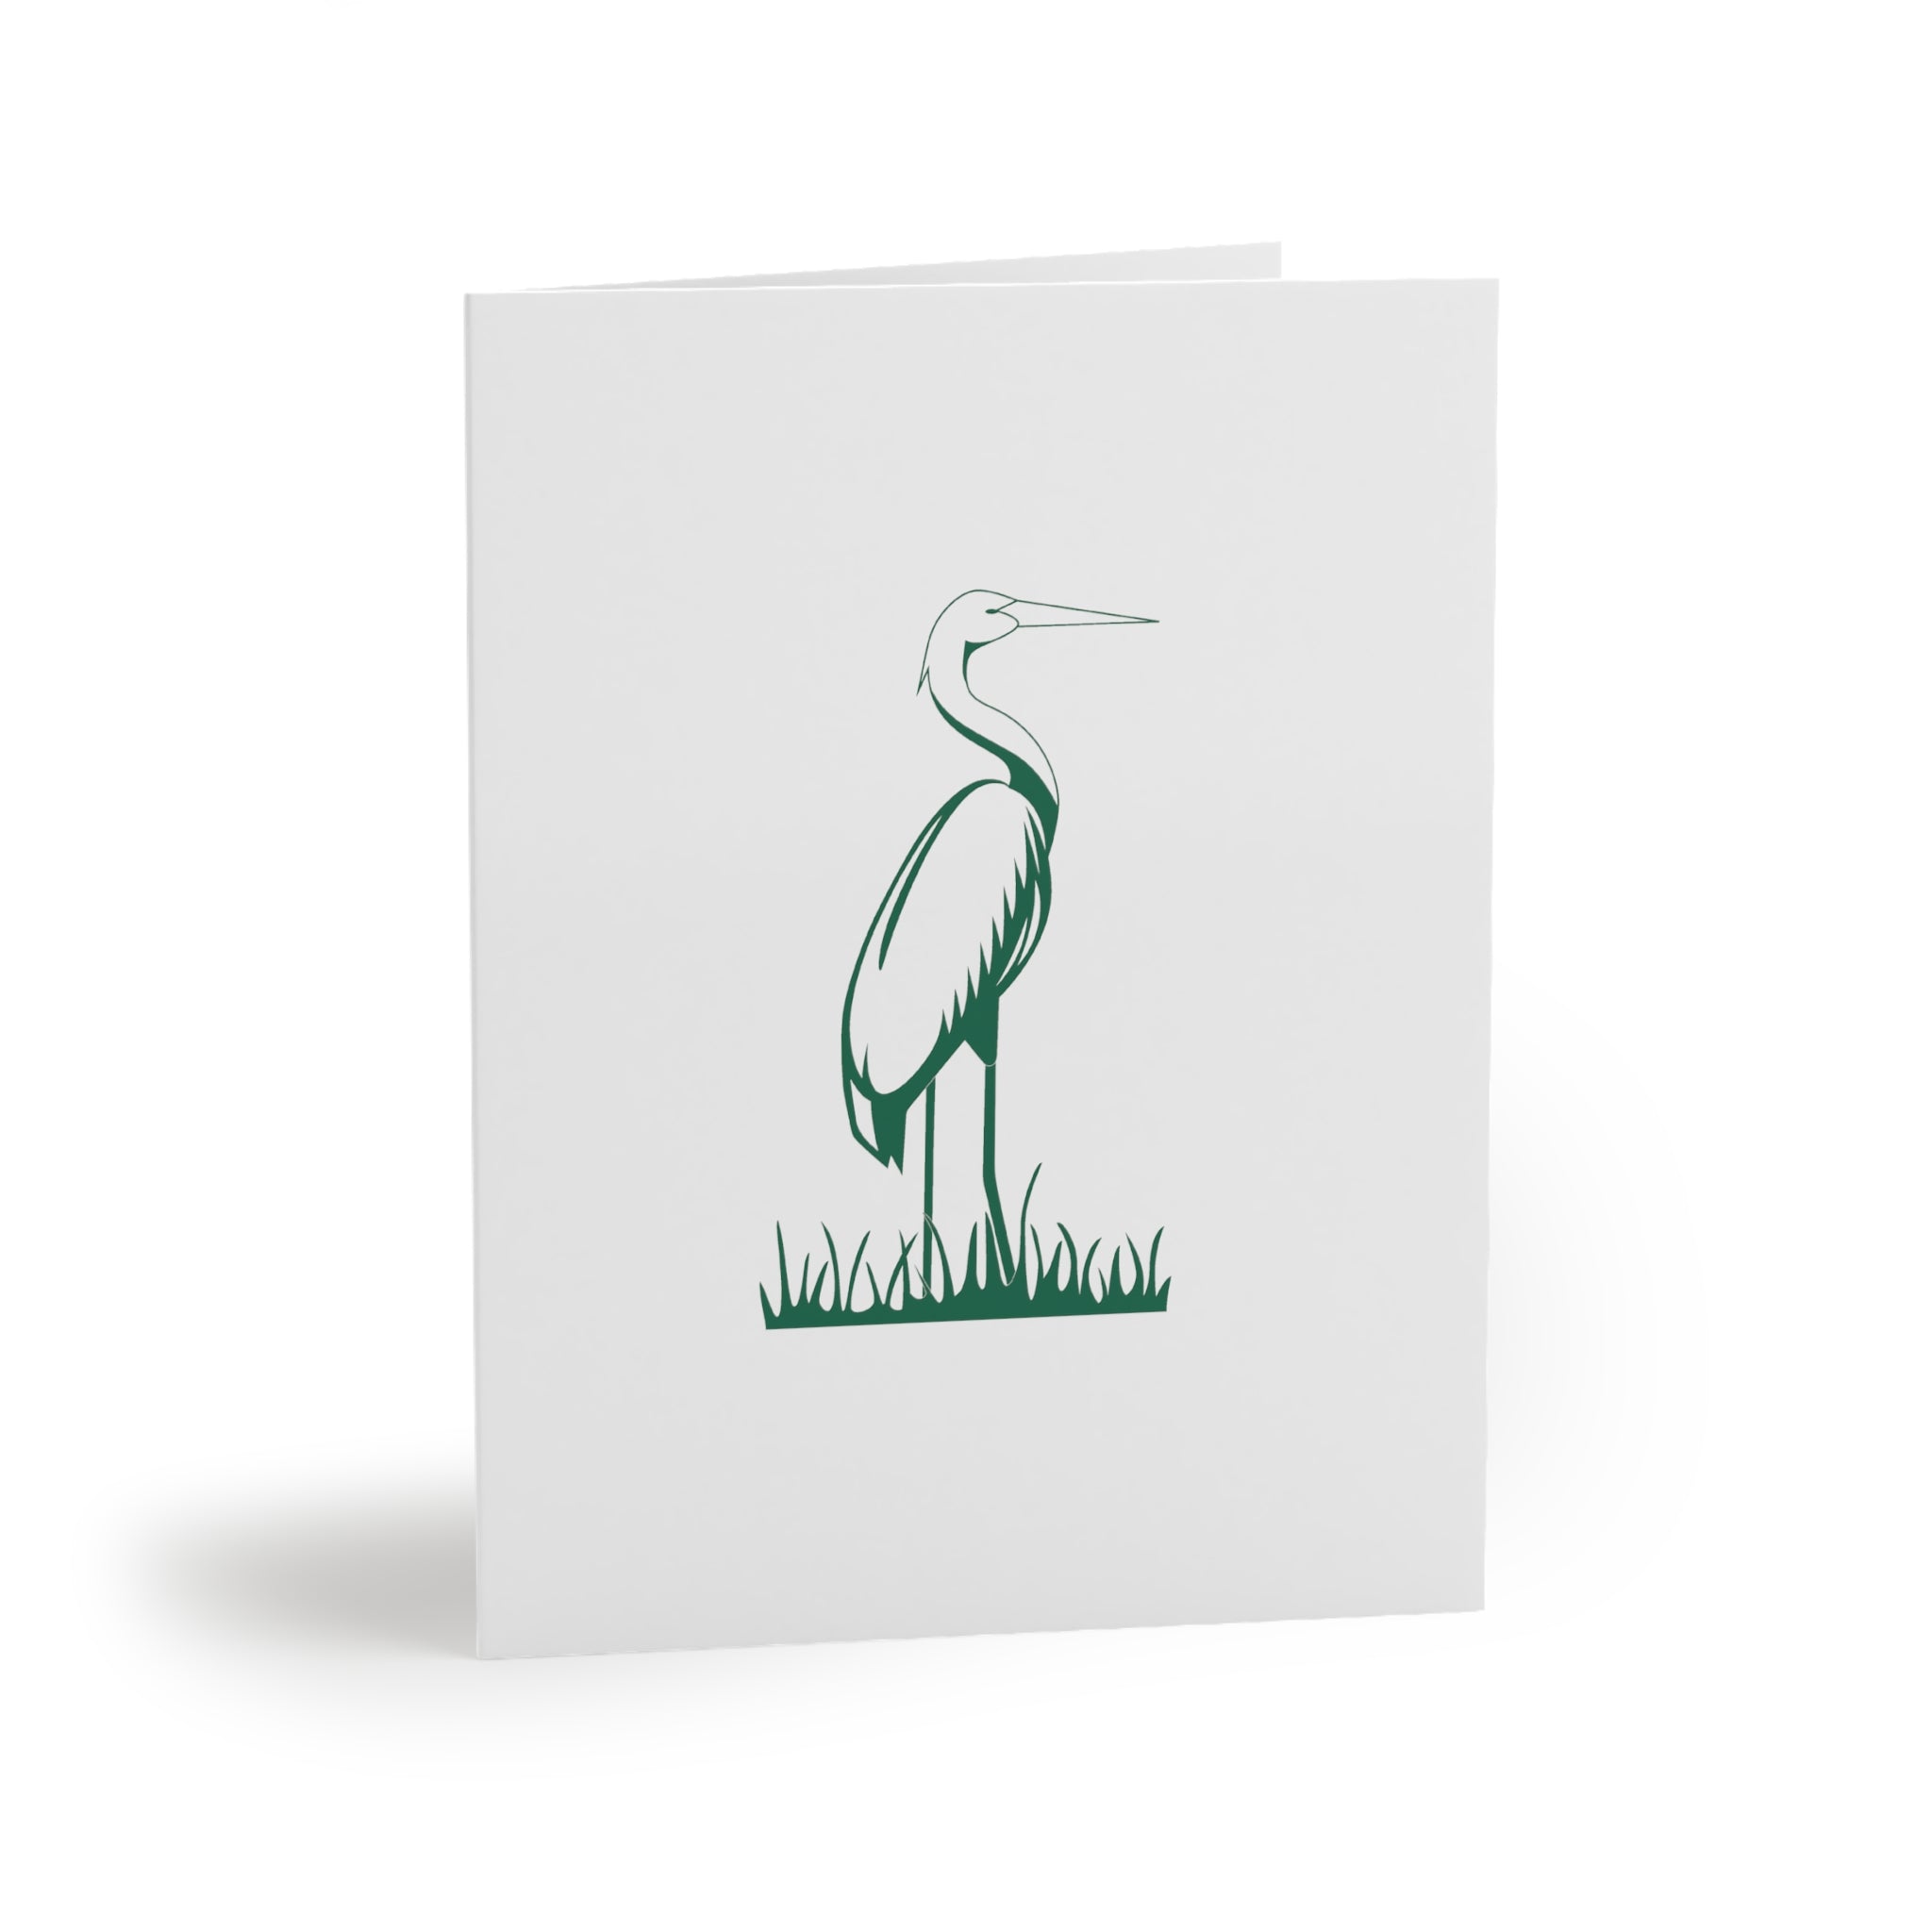 Wilderness Greeting cards (8, 16, and 24 pcs)